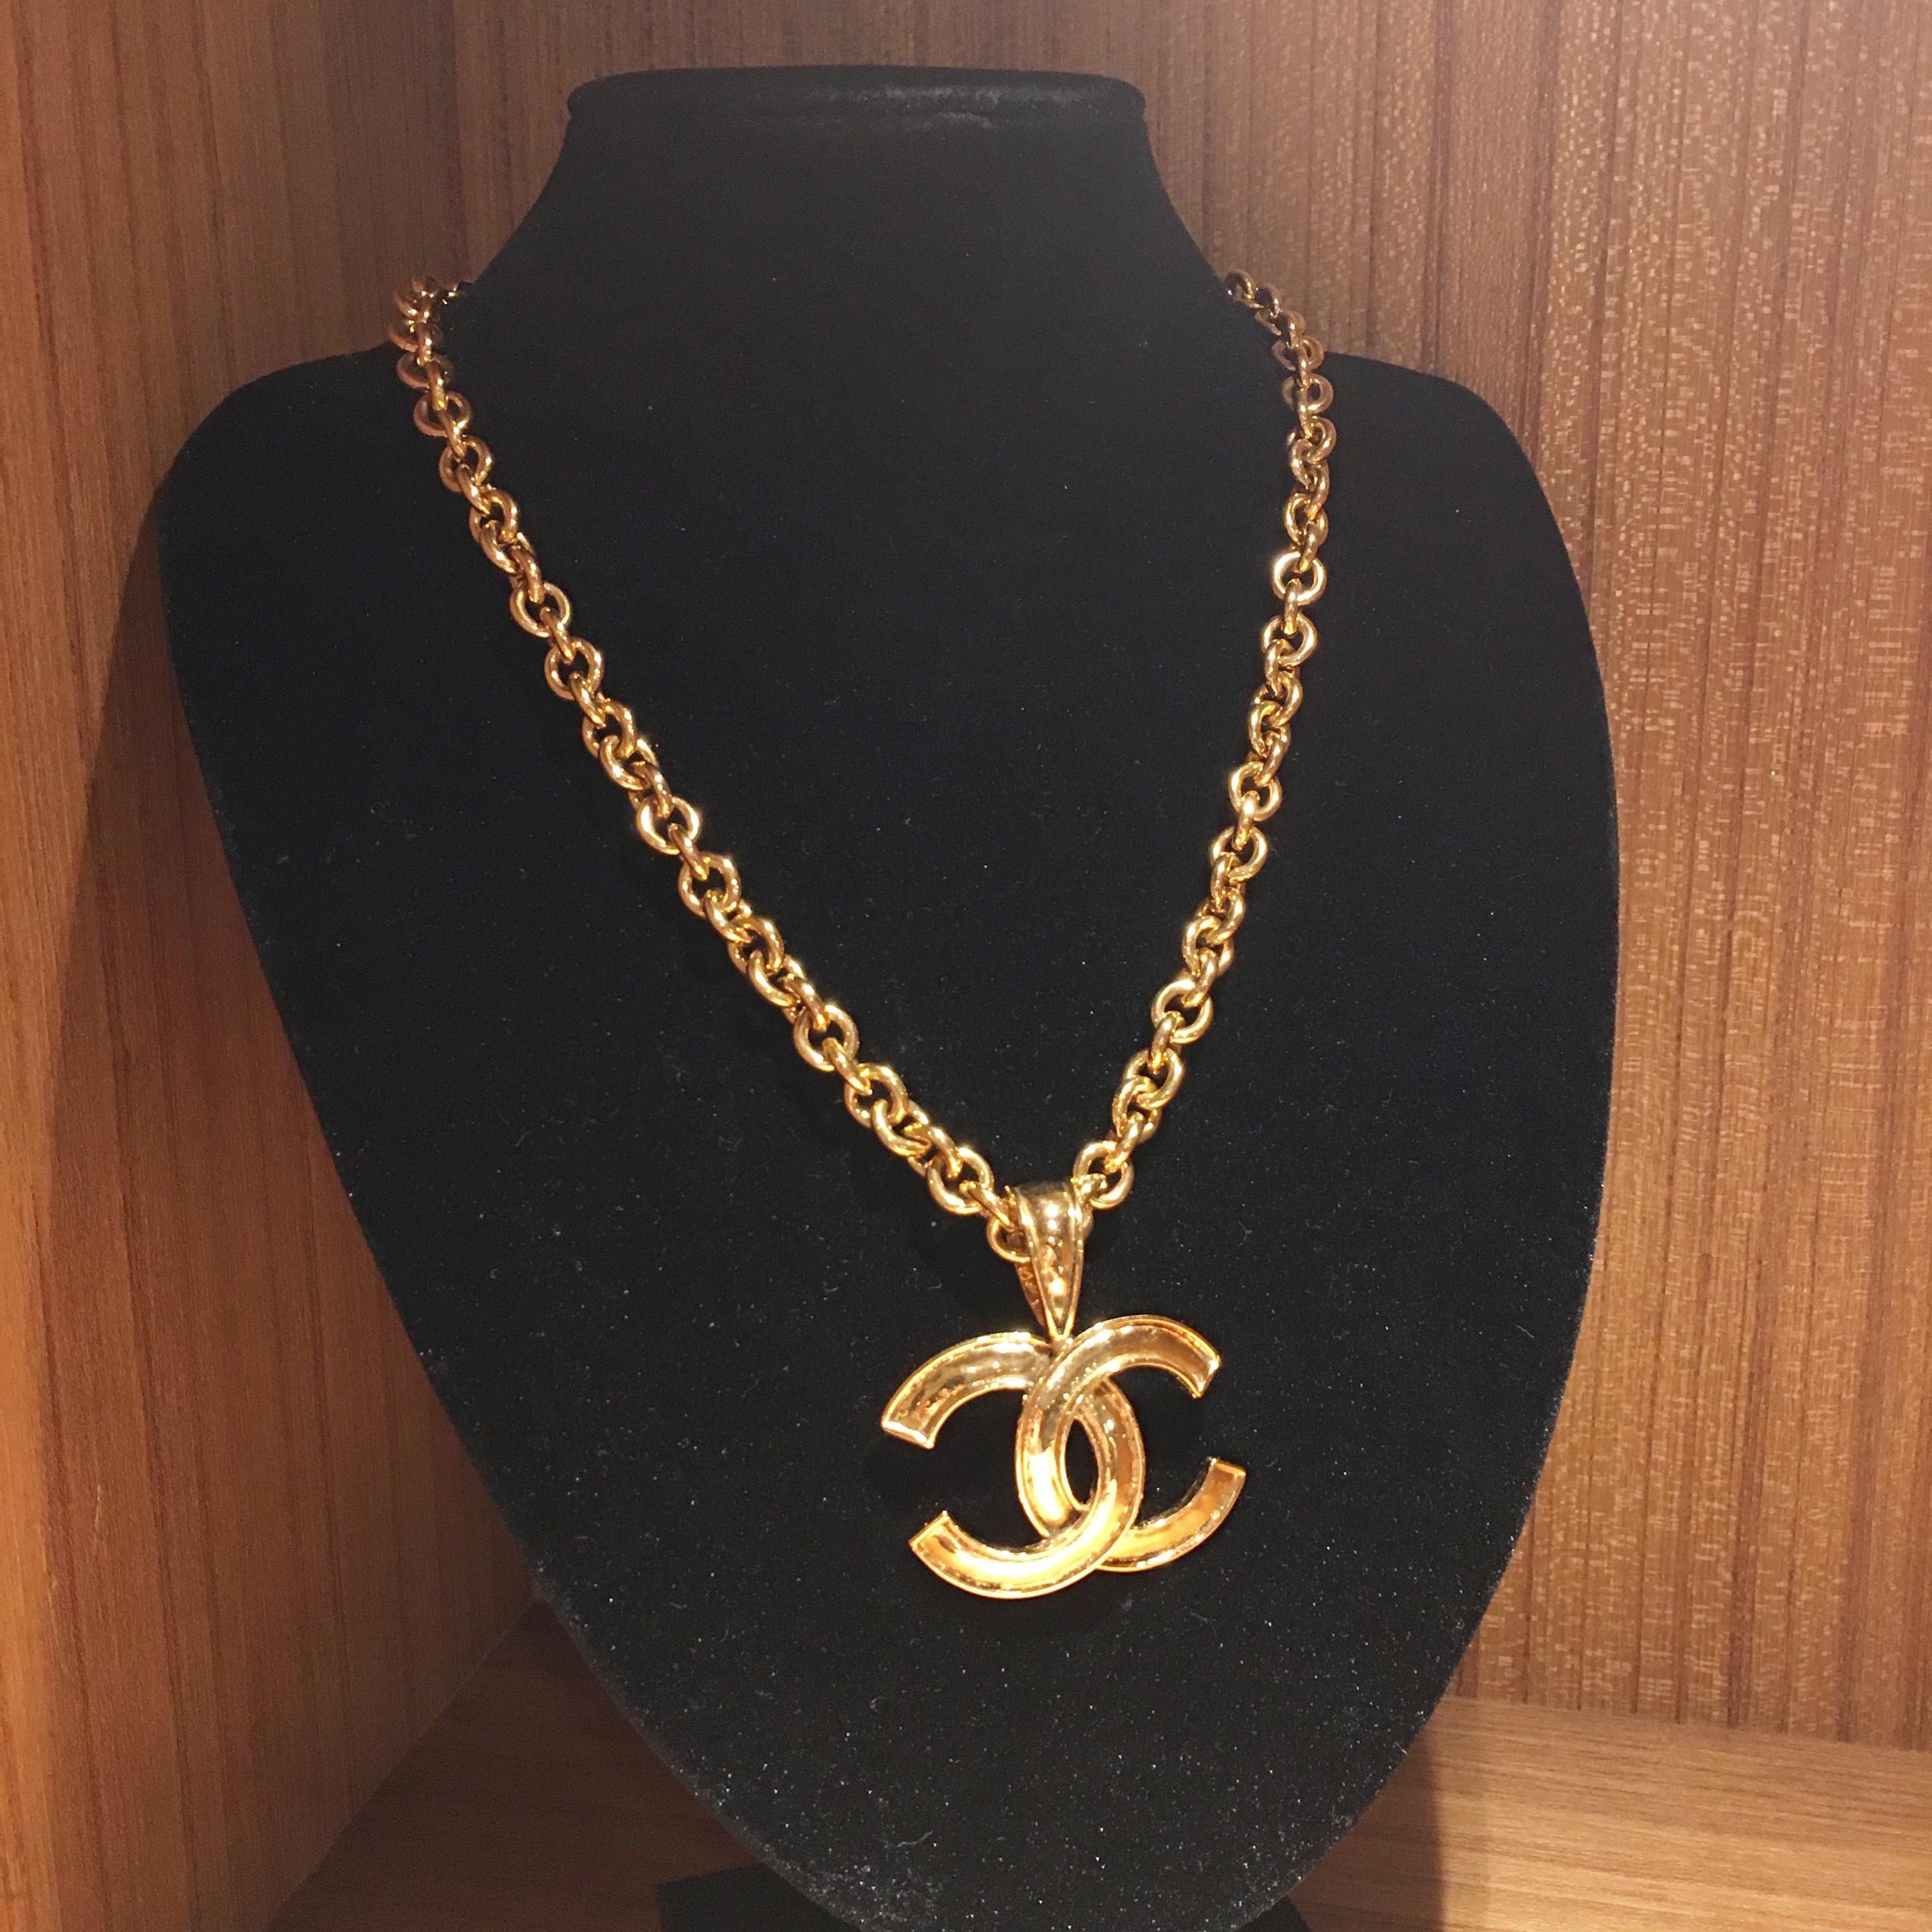 Brand: Chanel
Reference: JW359
Total Length of Necklace: 49cm
Measurement of chanel Logo: 3.2×4.2cm
Material: Gold Plated / Gilt Metal
Year: 1994
Made in France

Please Note: the jewelries are guarantee 100% authentic pre-owned therefore might have